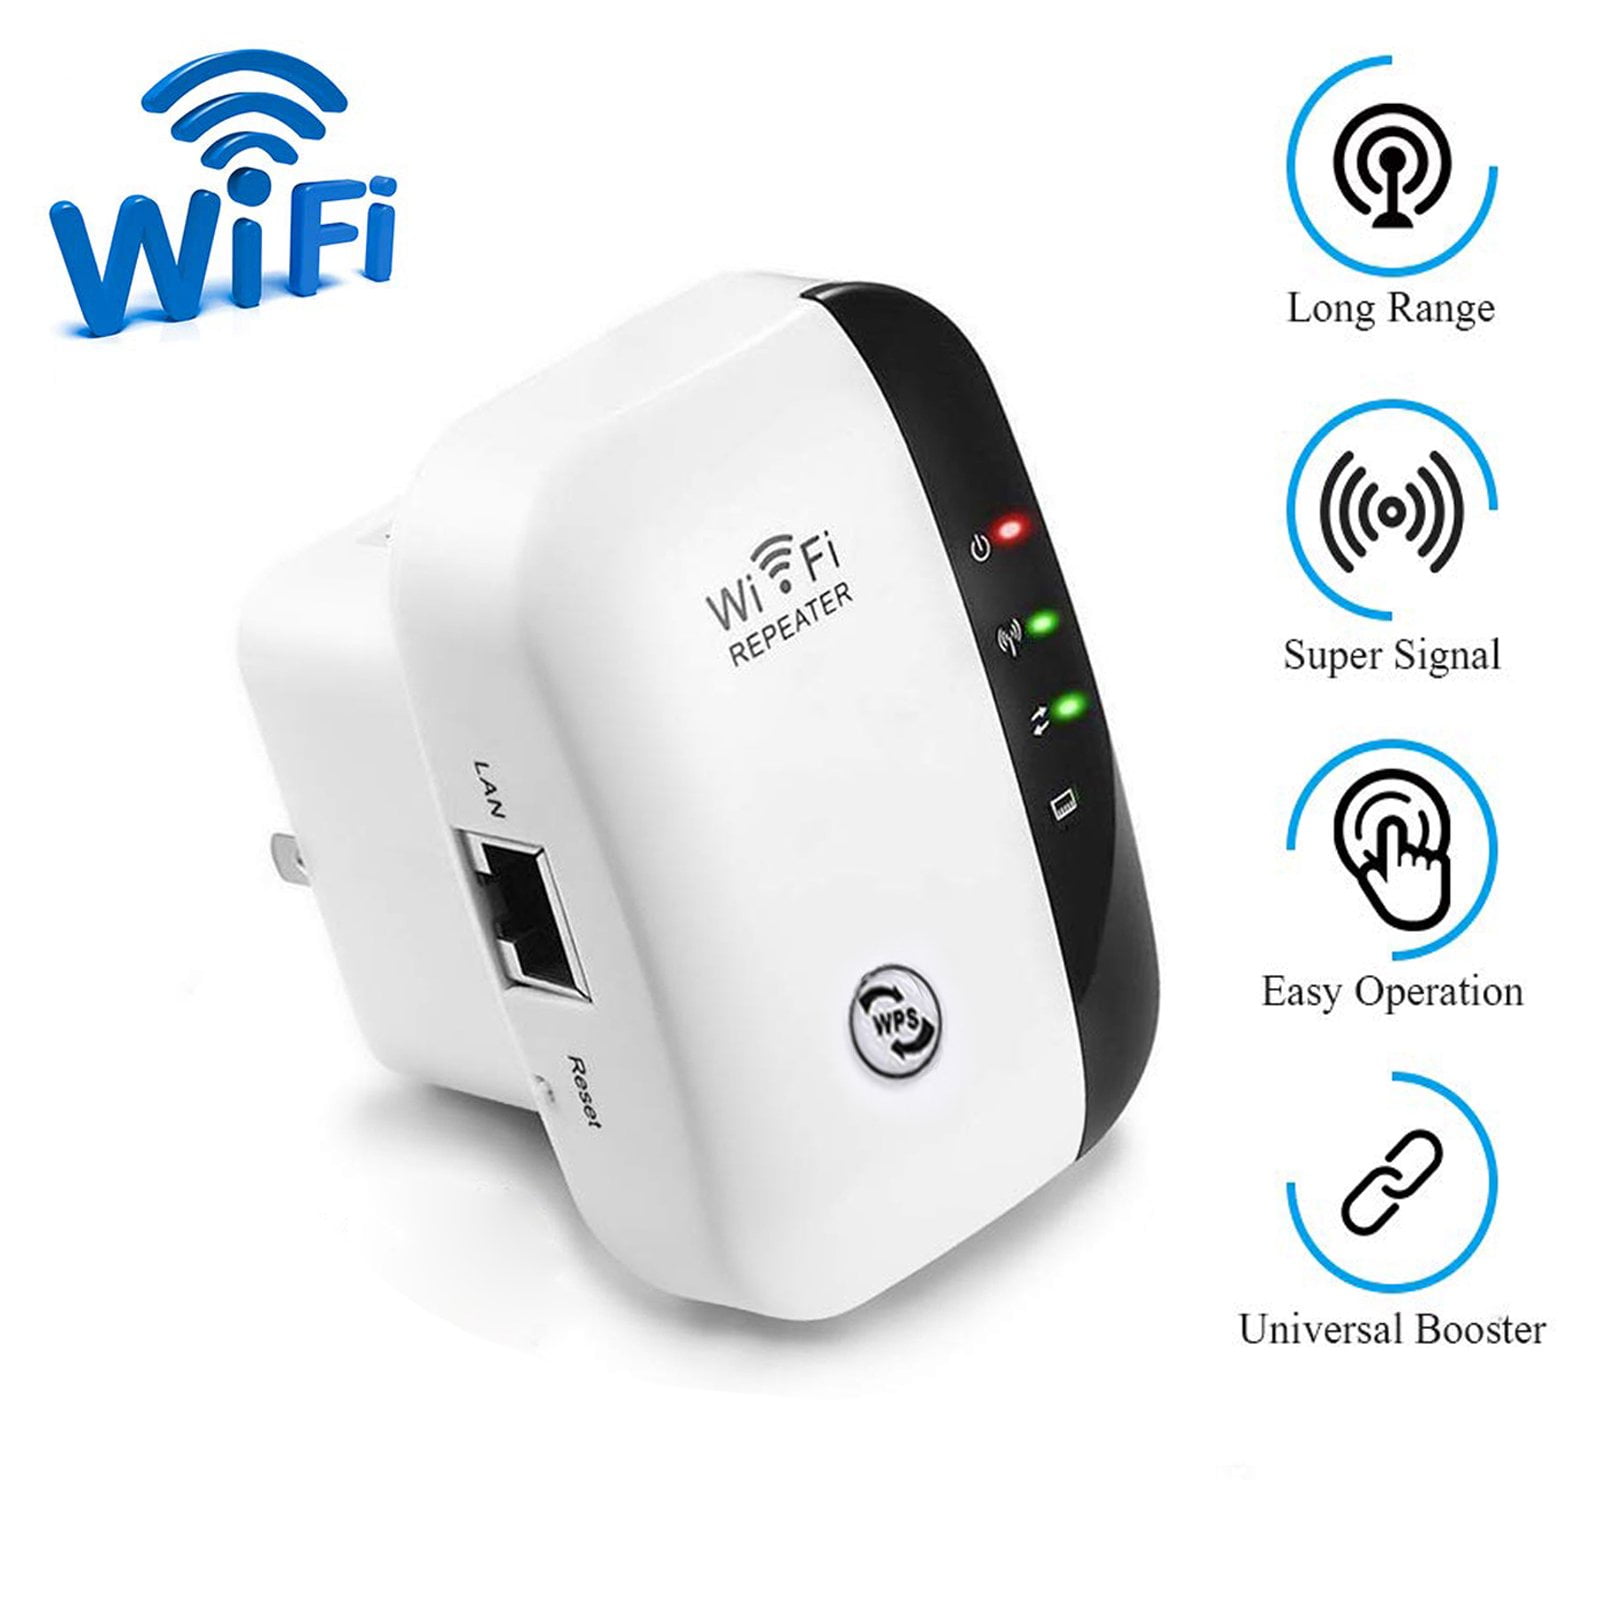 WiFi Range Extender | Up to 300Mbps |Repeater, WiFi Signal Booster, Access Point | Easy Set-Up | Network with Integrated Antennas LAN Port & Compact Designed Internet Booster(US Plug) - Walmart.com